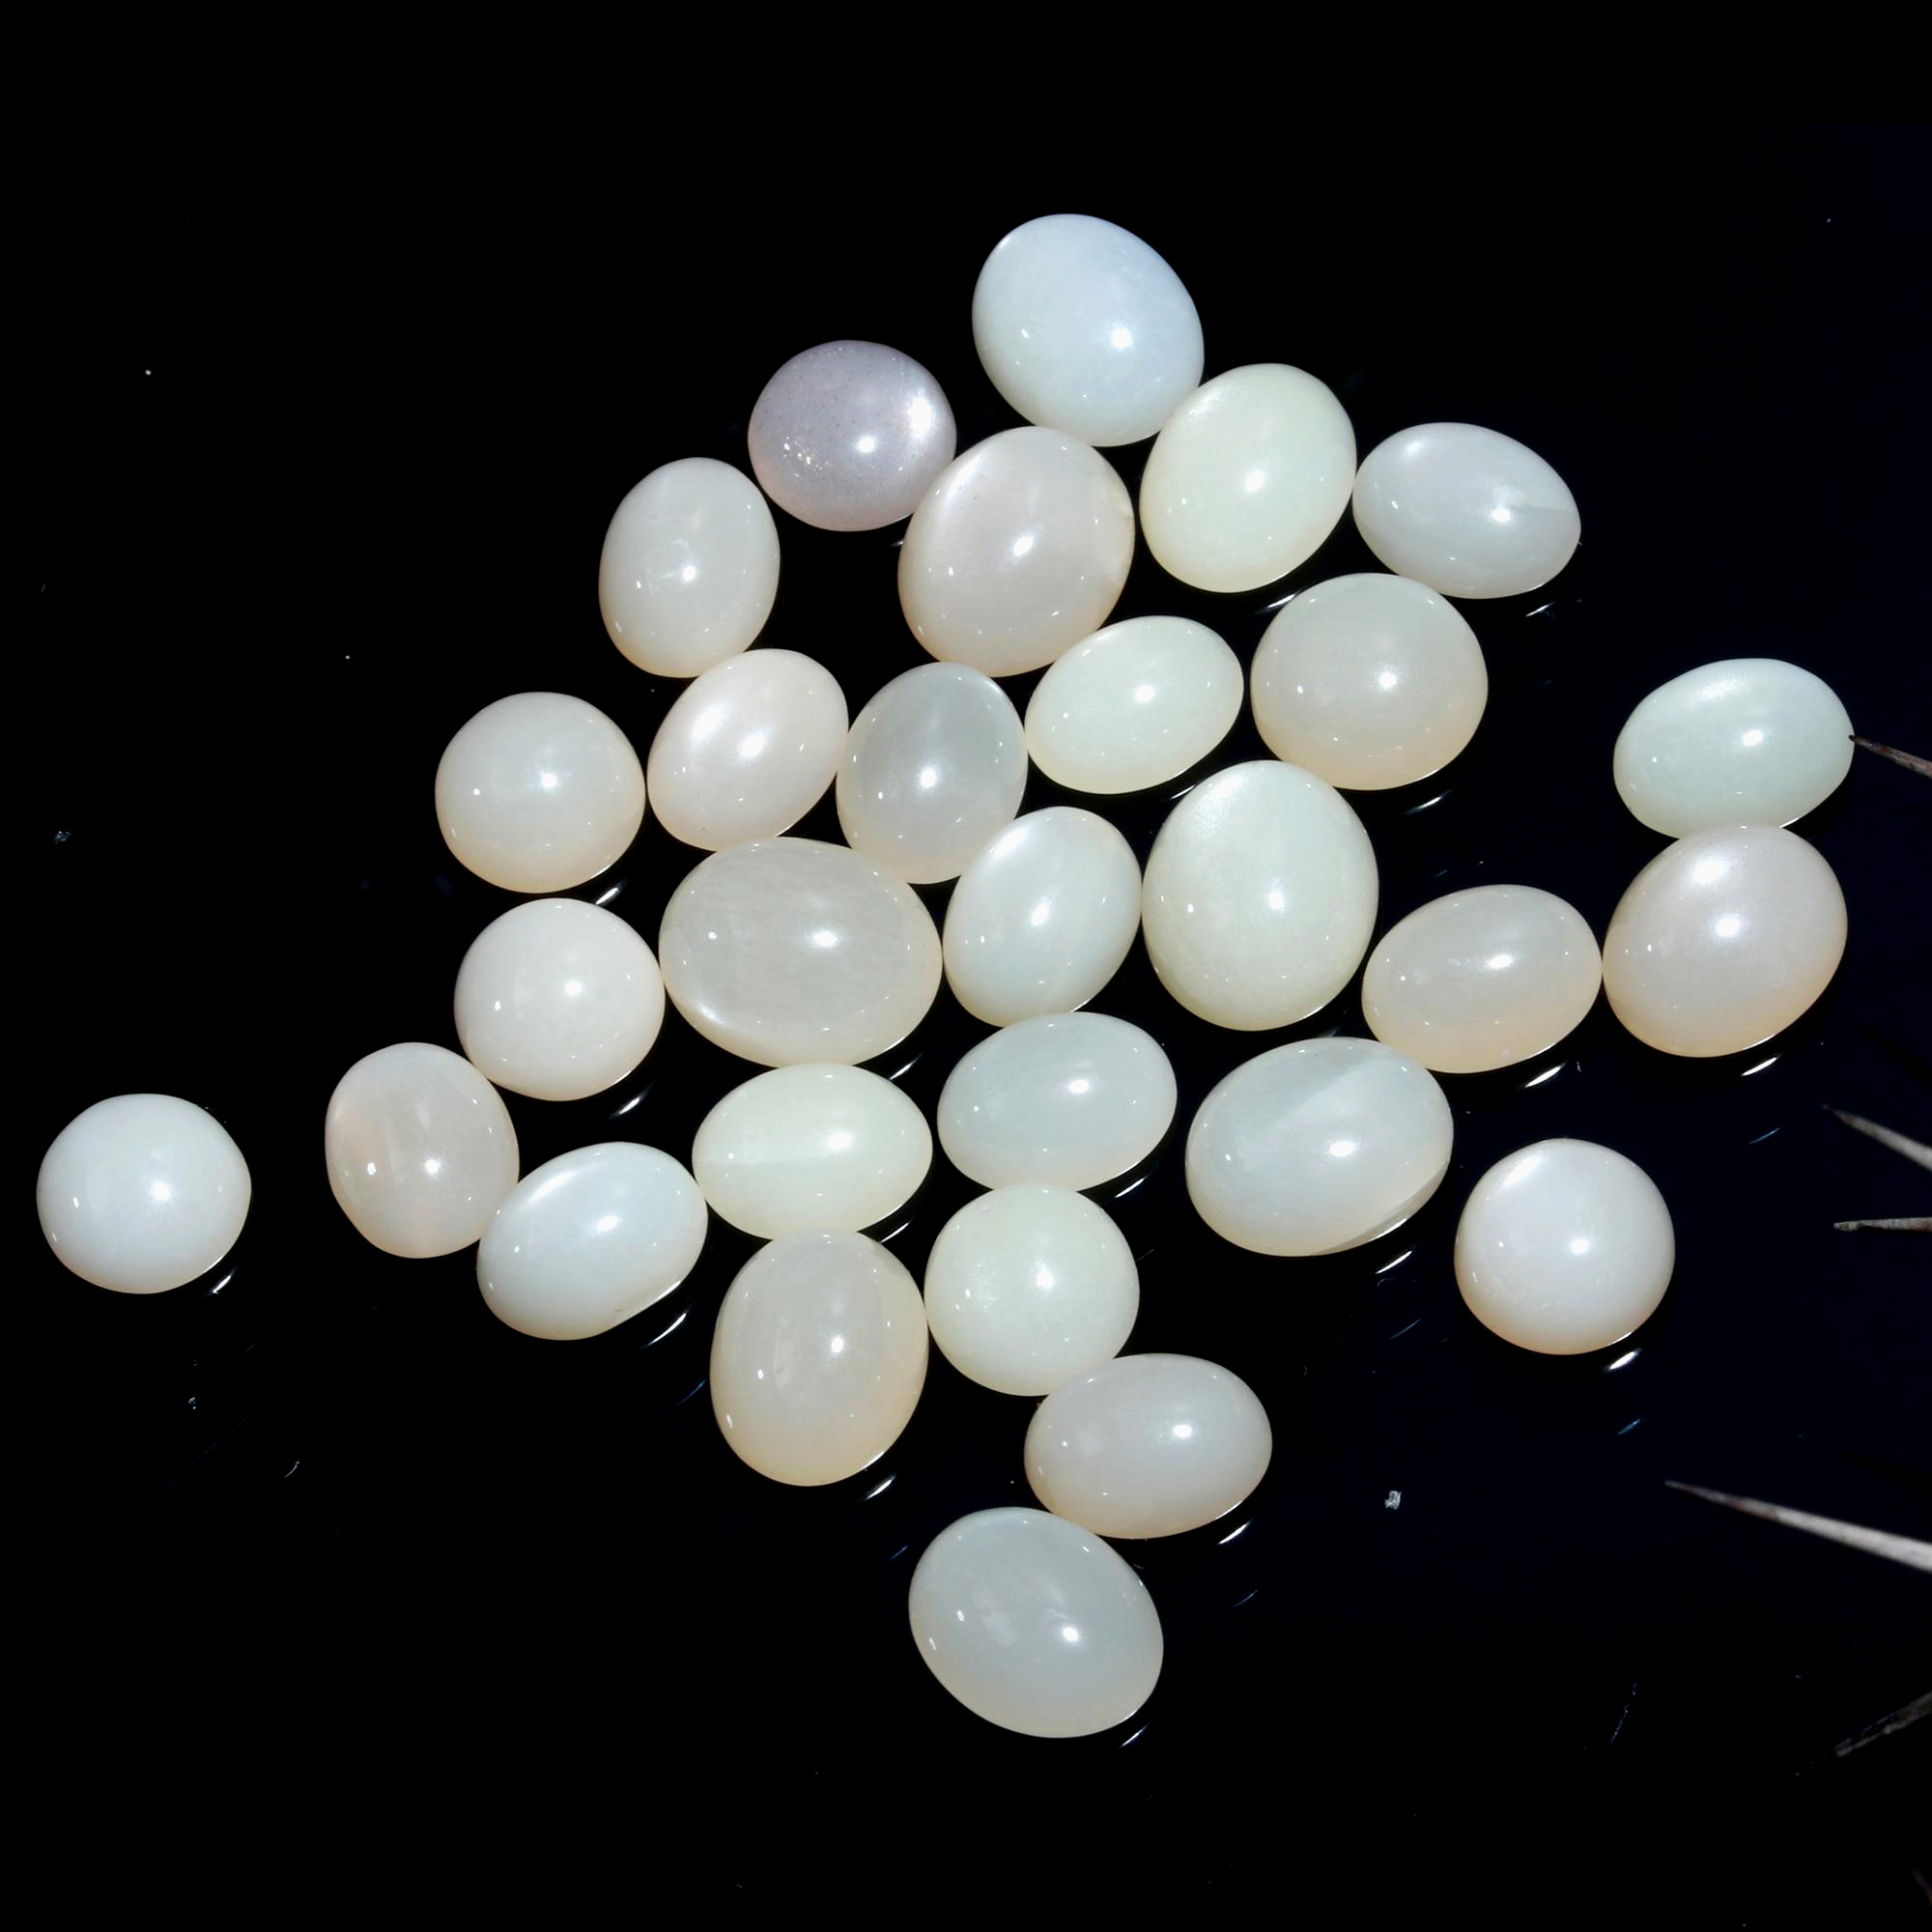 29 Pcs. 66Cts. Natural White Rainbow Moonstone polished Mix Cabochon Wholesale Loose Lot Size 11x9 8x8mm Gemstone for jewelry